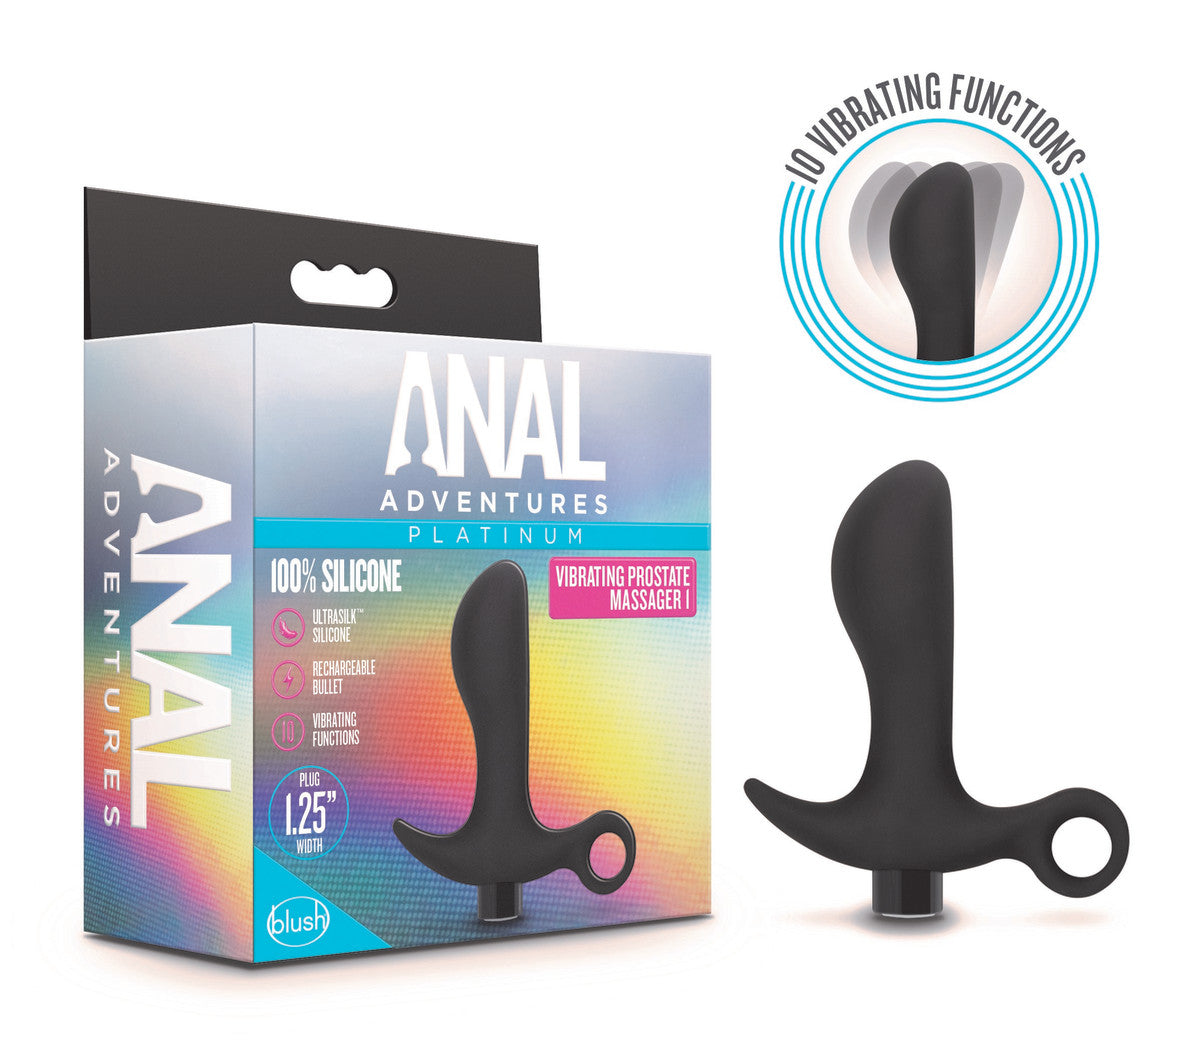 Anal Adventures Platinum Prostate Massager 01 Curved Black 4.25-Inch Vibrating Rechargeable Anal Plug